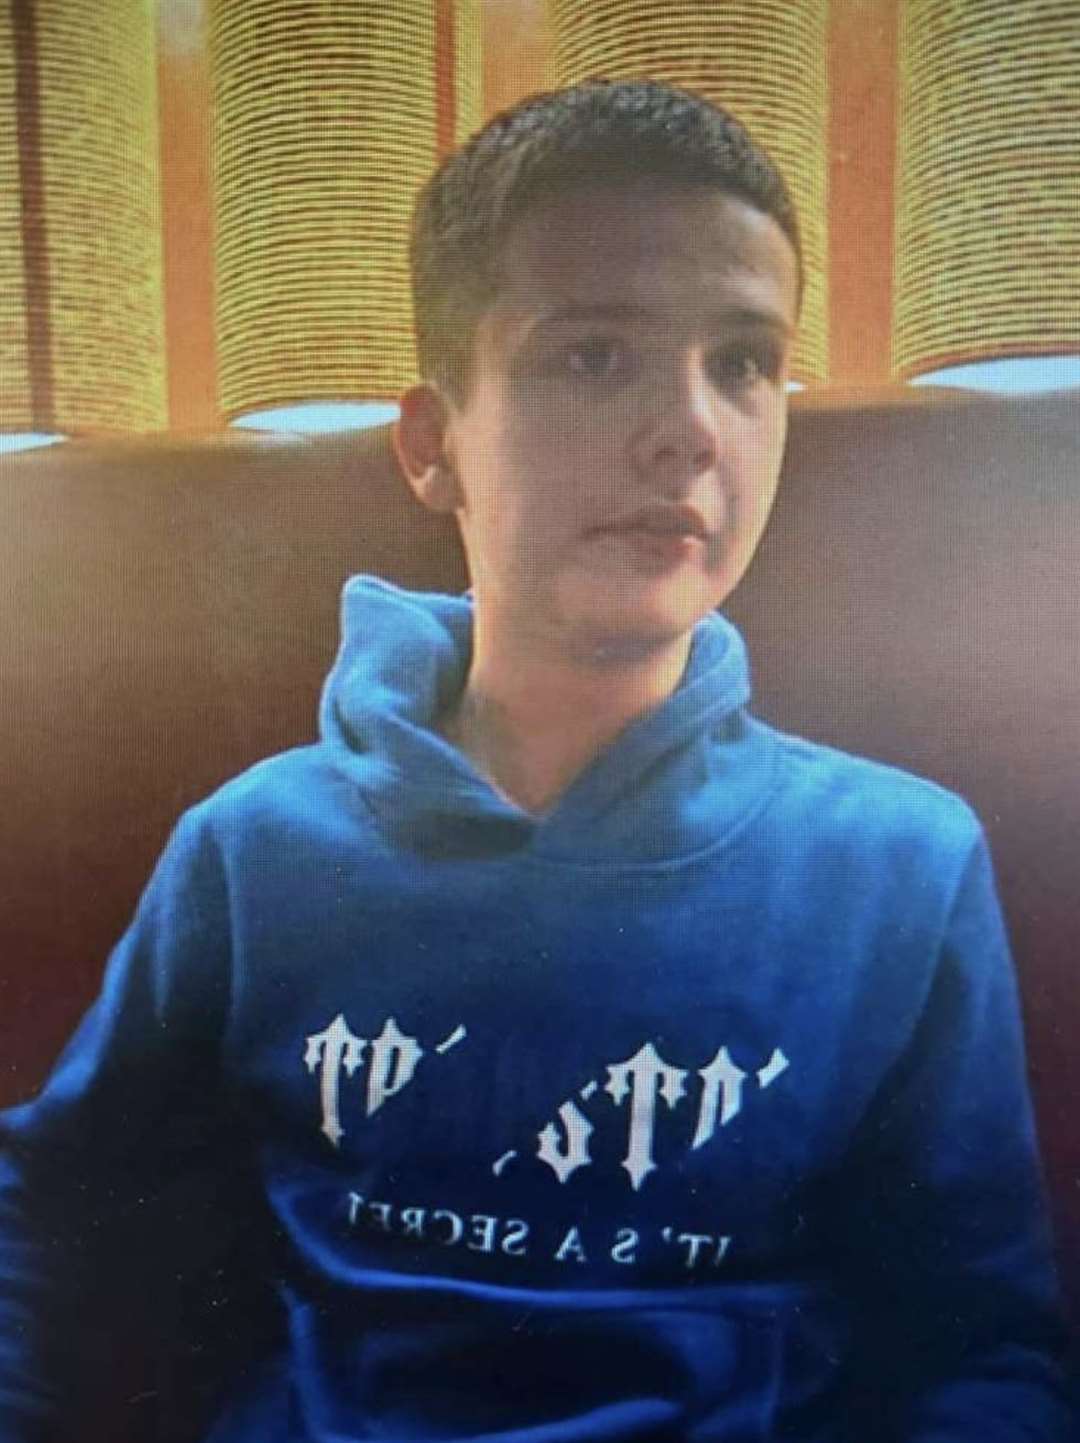 Nico Adams (16) has found with traces to Inverness area